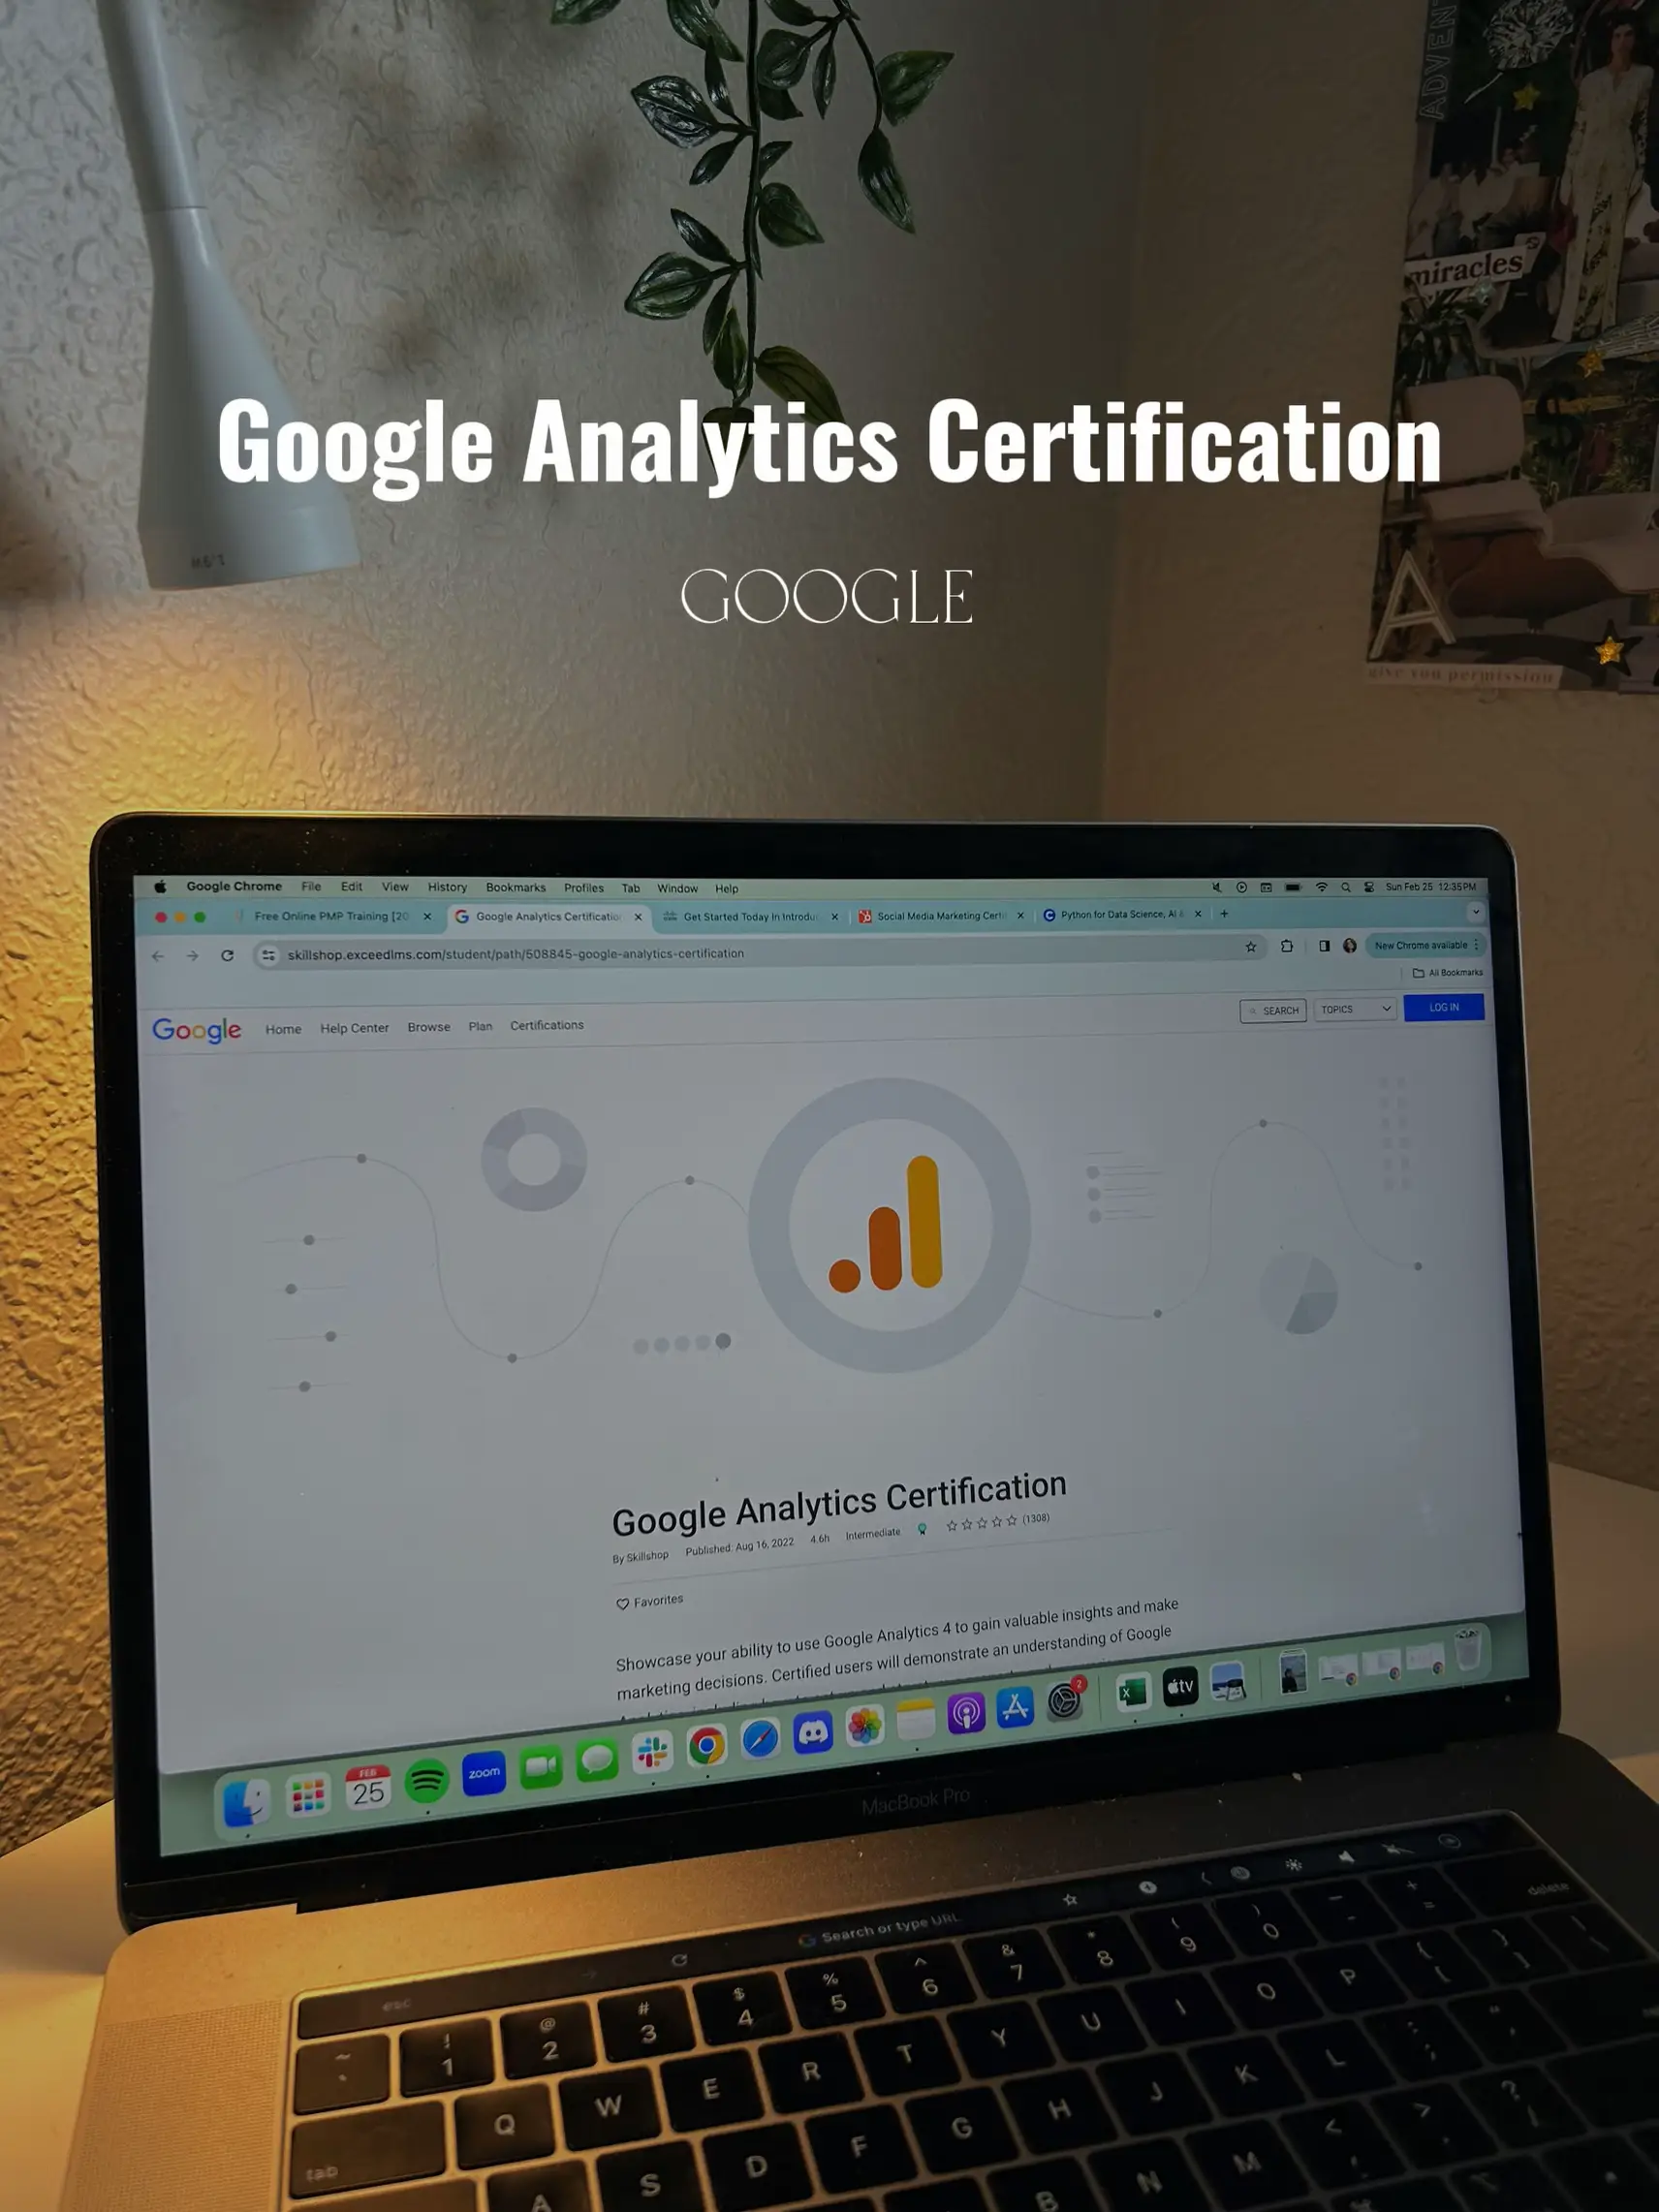  A laptop screen with a Google Analytics Certification page open.